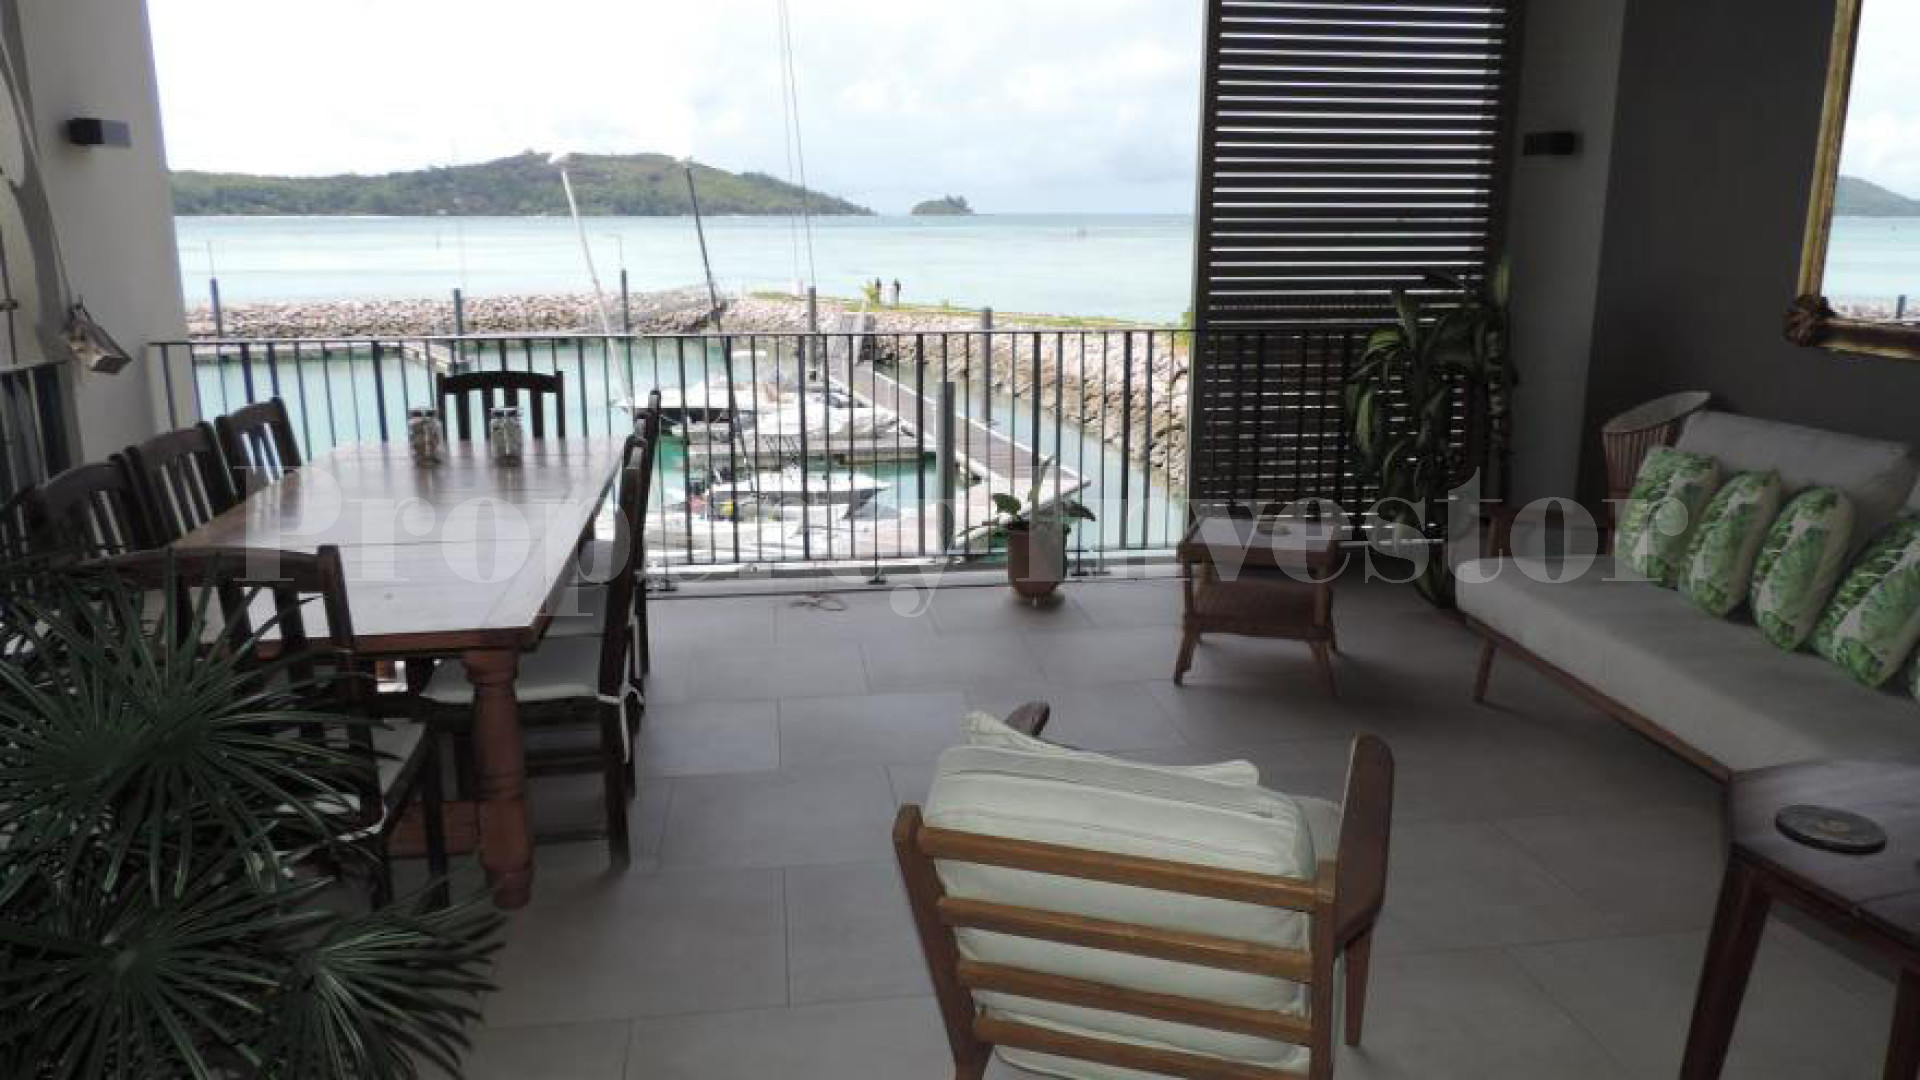 Exclusive 3 Bedroom Luxury Designer Beachfront Apartment with Spectacular Sea Views for Sale in Mahé, Seychelles